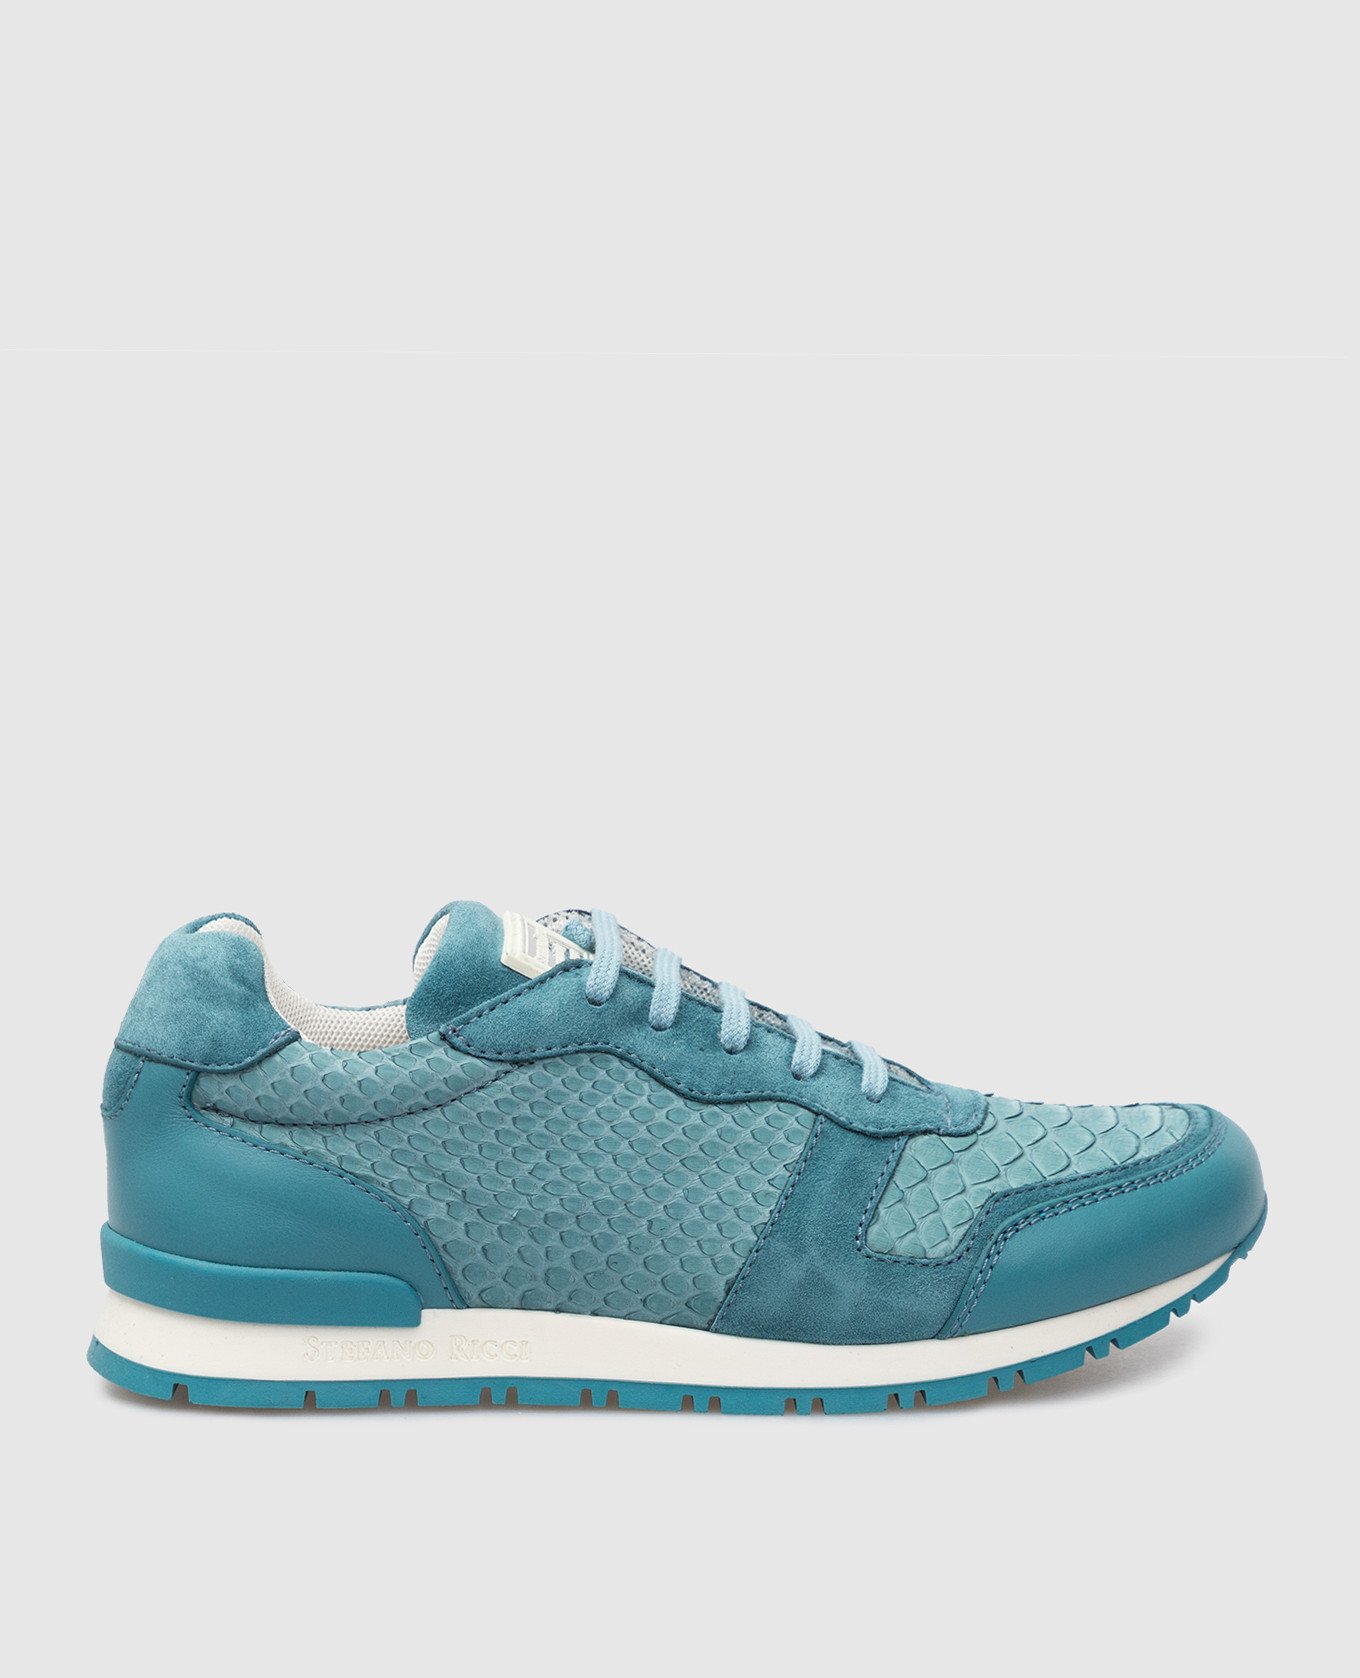 Children's turquoise leather sneakers